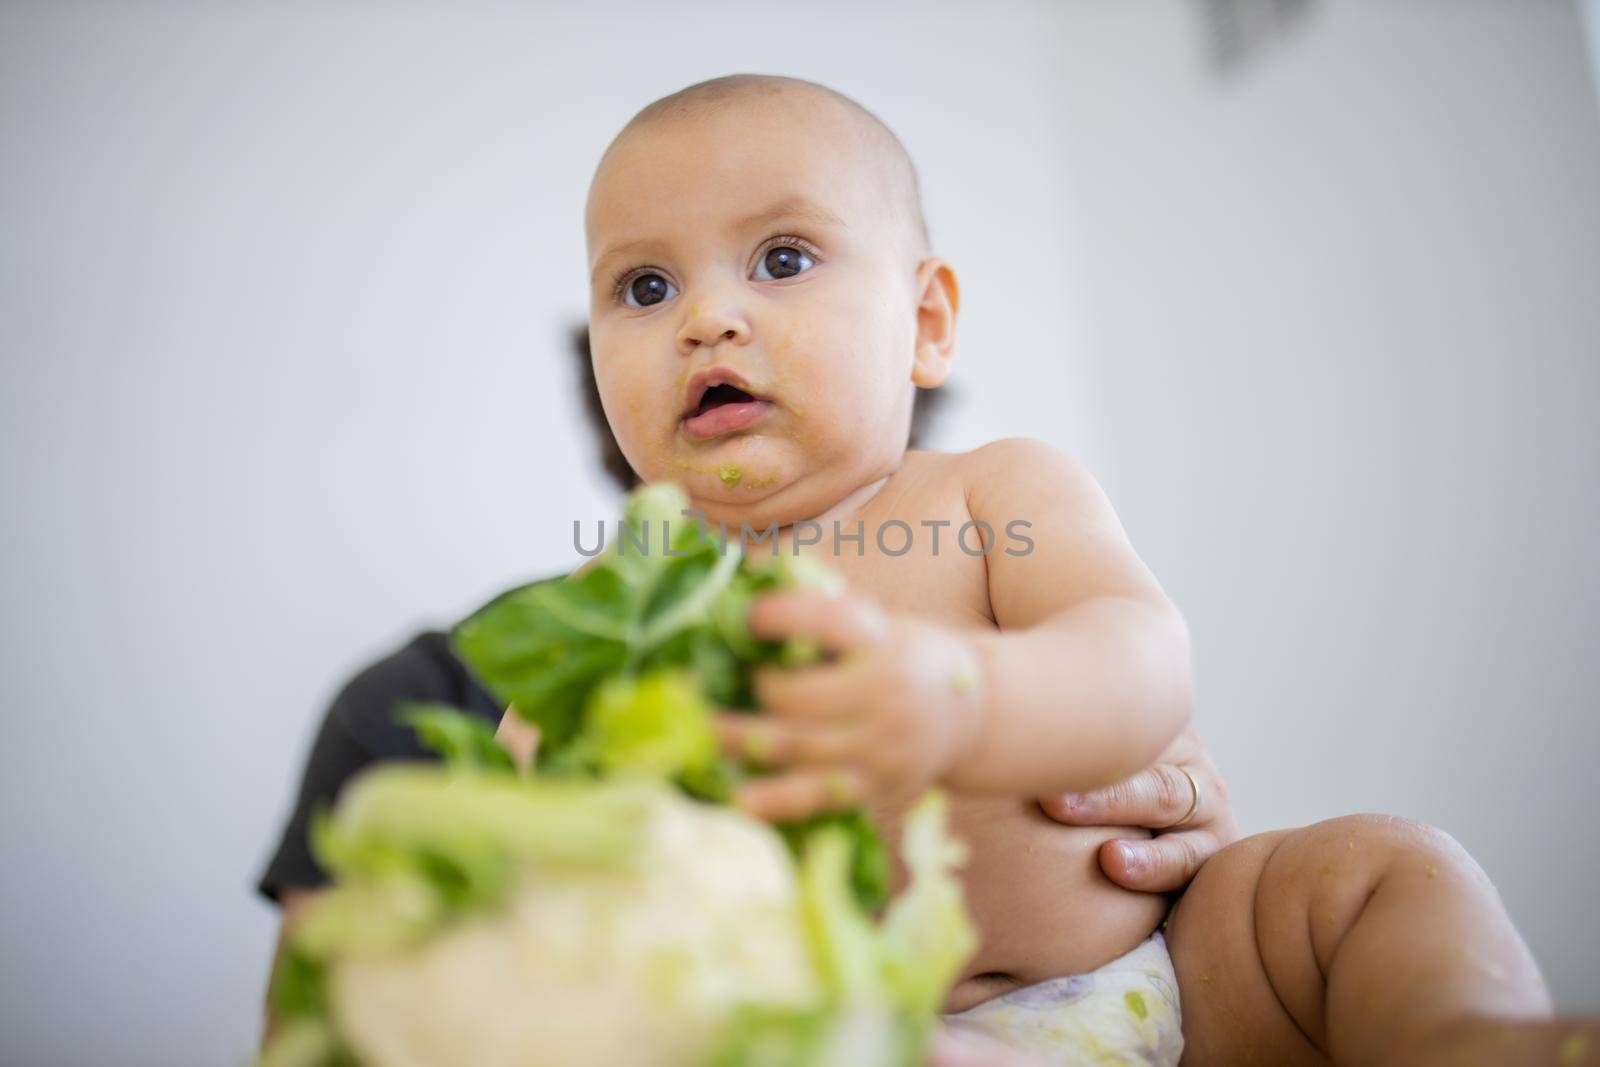 Adorable baby on a table holding a cauliflower by Kanelbulle